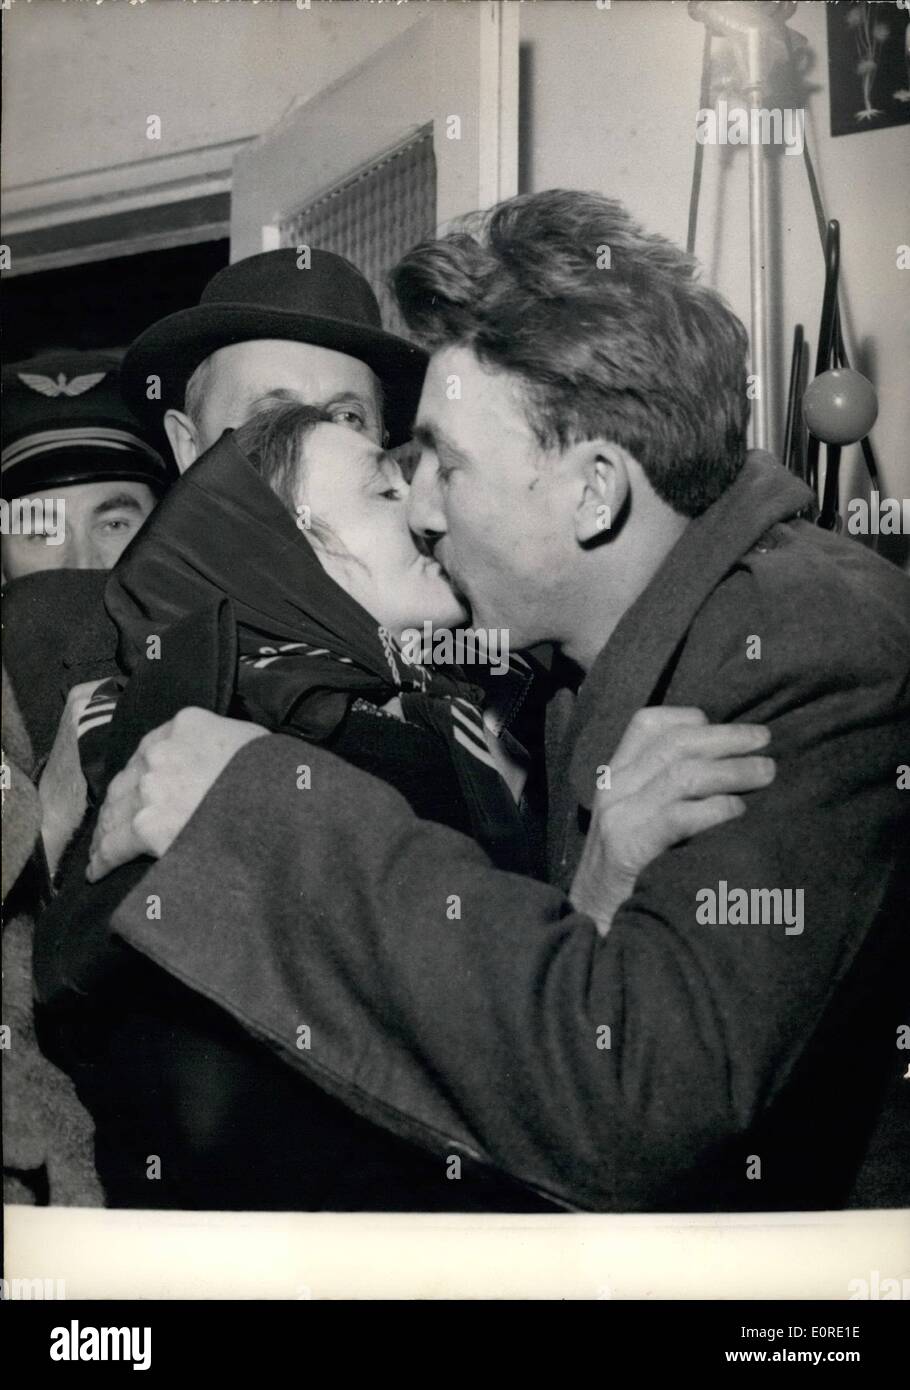 Feb. 02, 1959 - Mother's Joy: Six French Soldiers who were kept Prisoner near the Moroccan frontier were set free by the Algerian Rebels and handed over to Moroccan Authorities. They arrived at Villacoublay, a military Airport near Paris, last night. Photo shows Gilber Fillieux, one of the Freed Prisoners, Being kissed by his mother on arrival at Villacoublay last night. Stock Photo